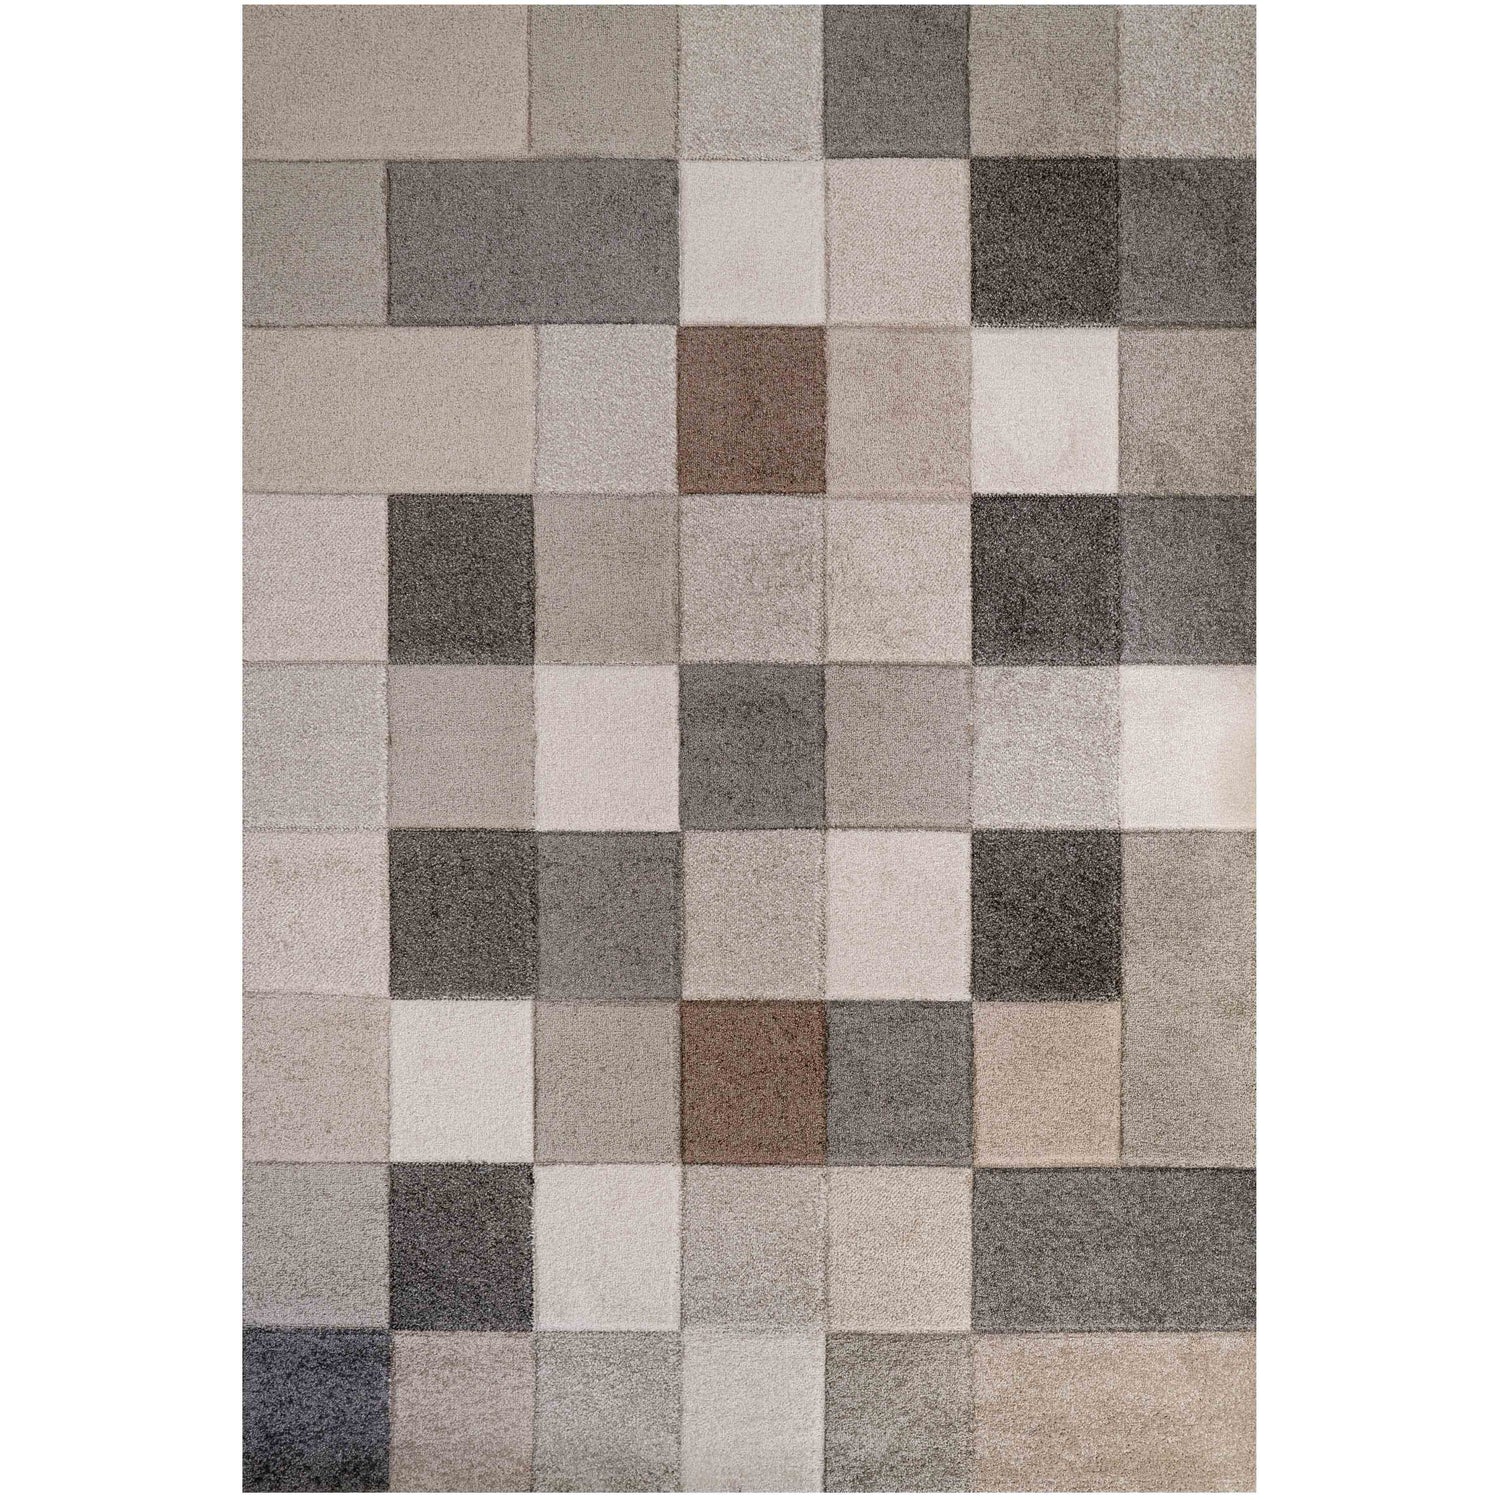 Soft Moroccan Block Squares Natural Beige Rugs